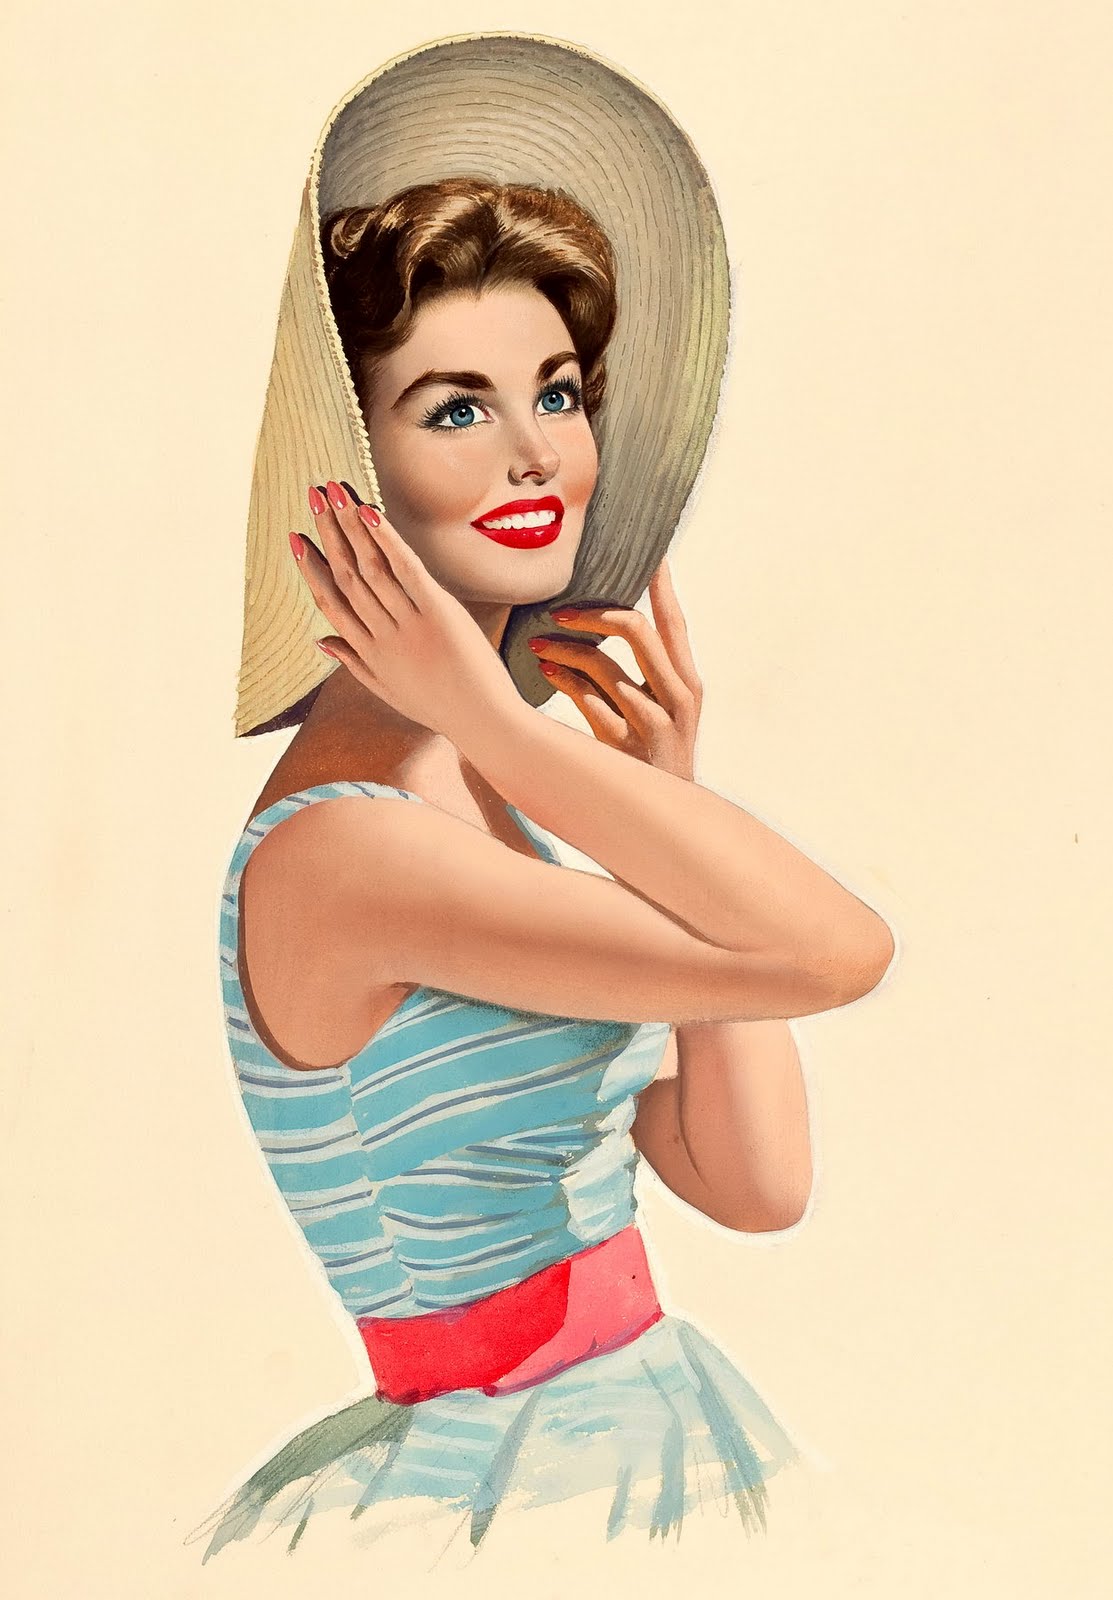 Vintage Drawings – Pin Up and Cartoon Girls Art | Vintage and Modern